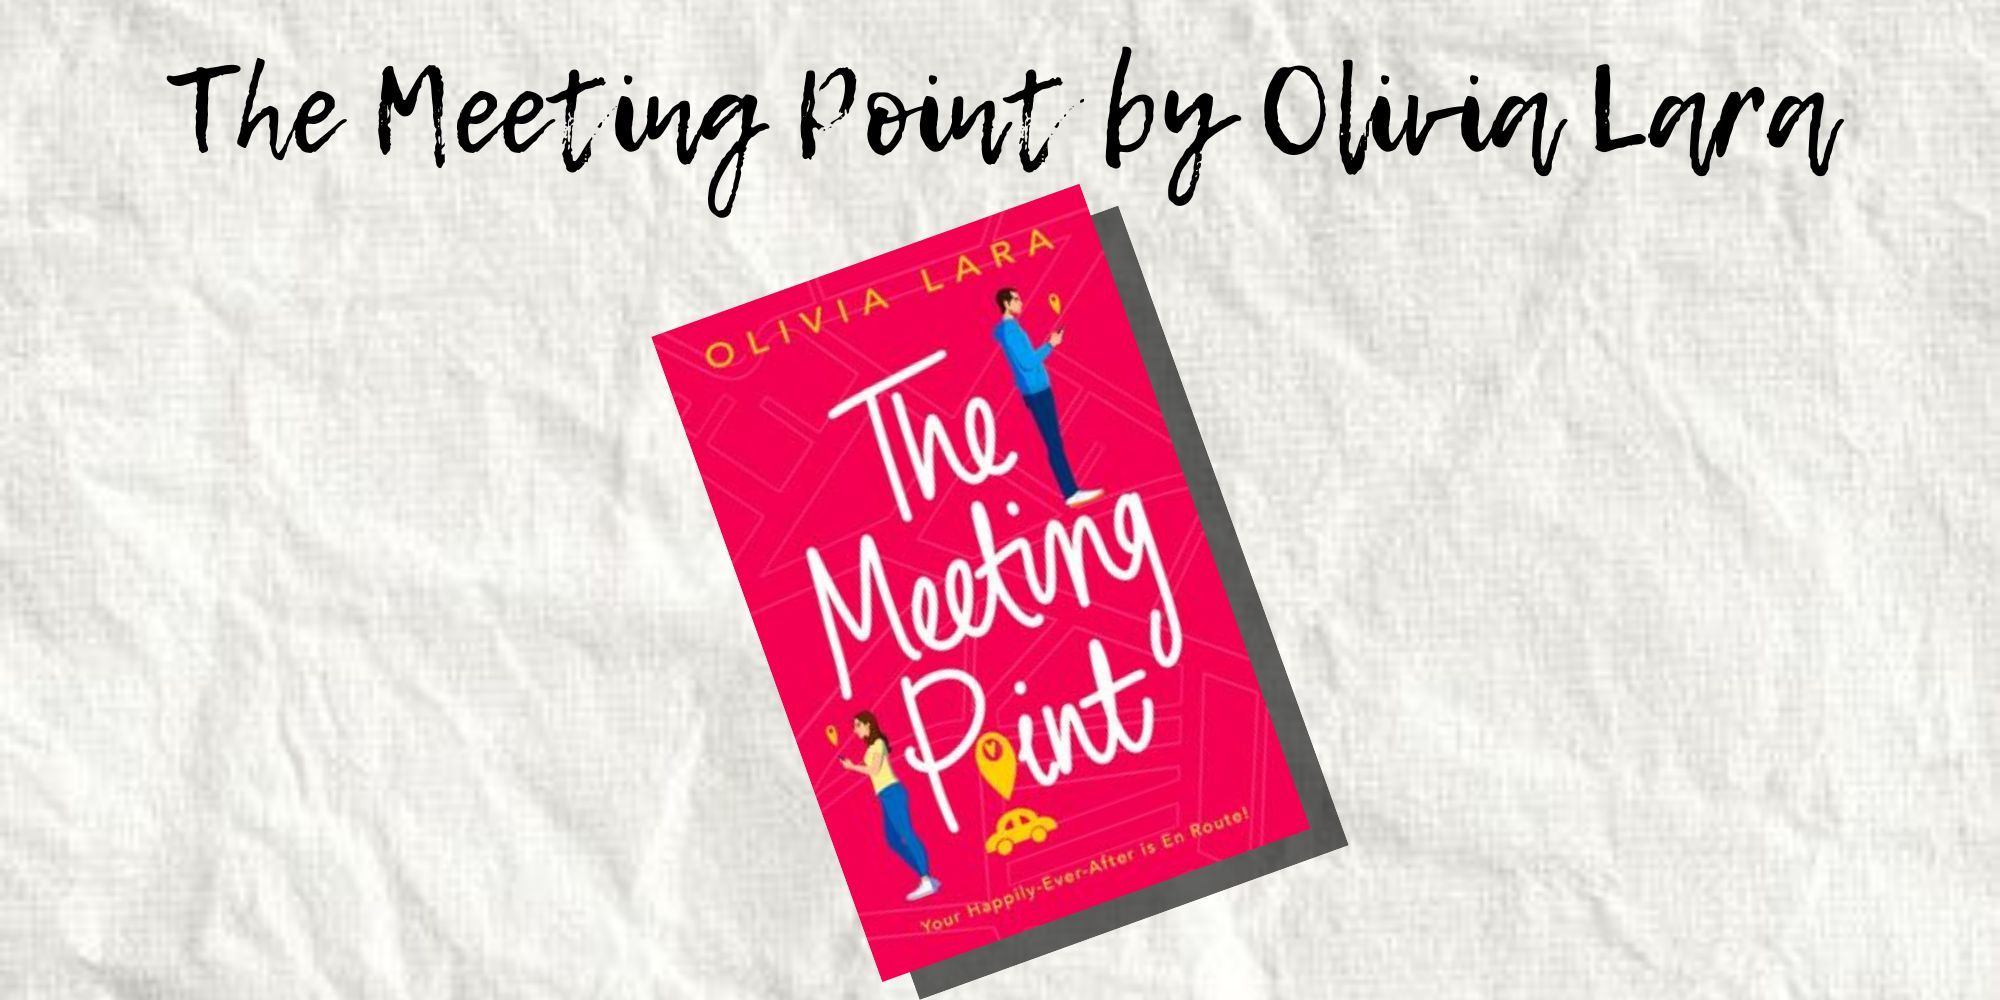 The Cover of The Meeting Point by Olivia Lara